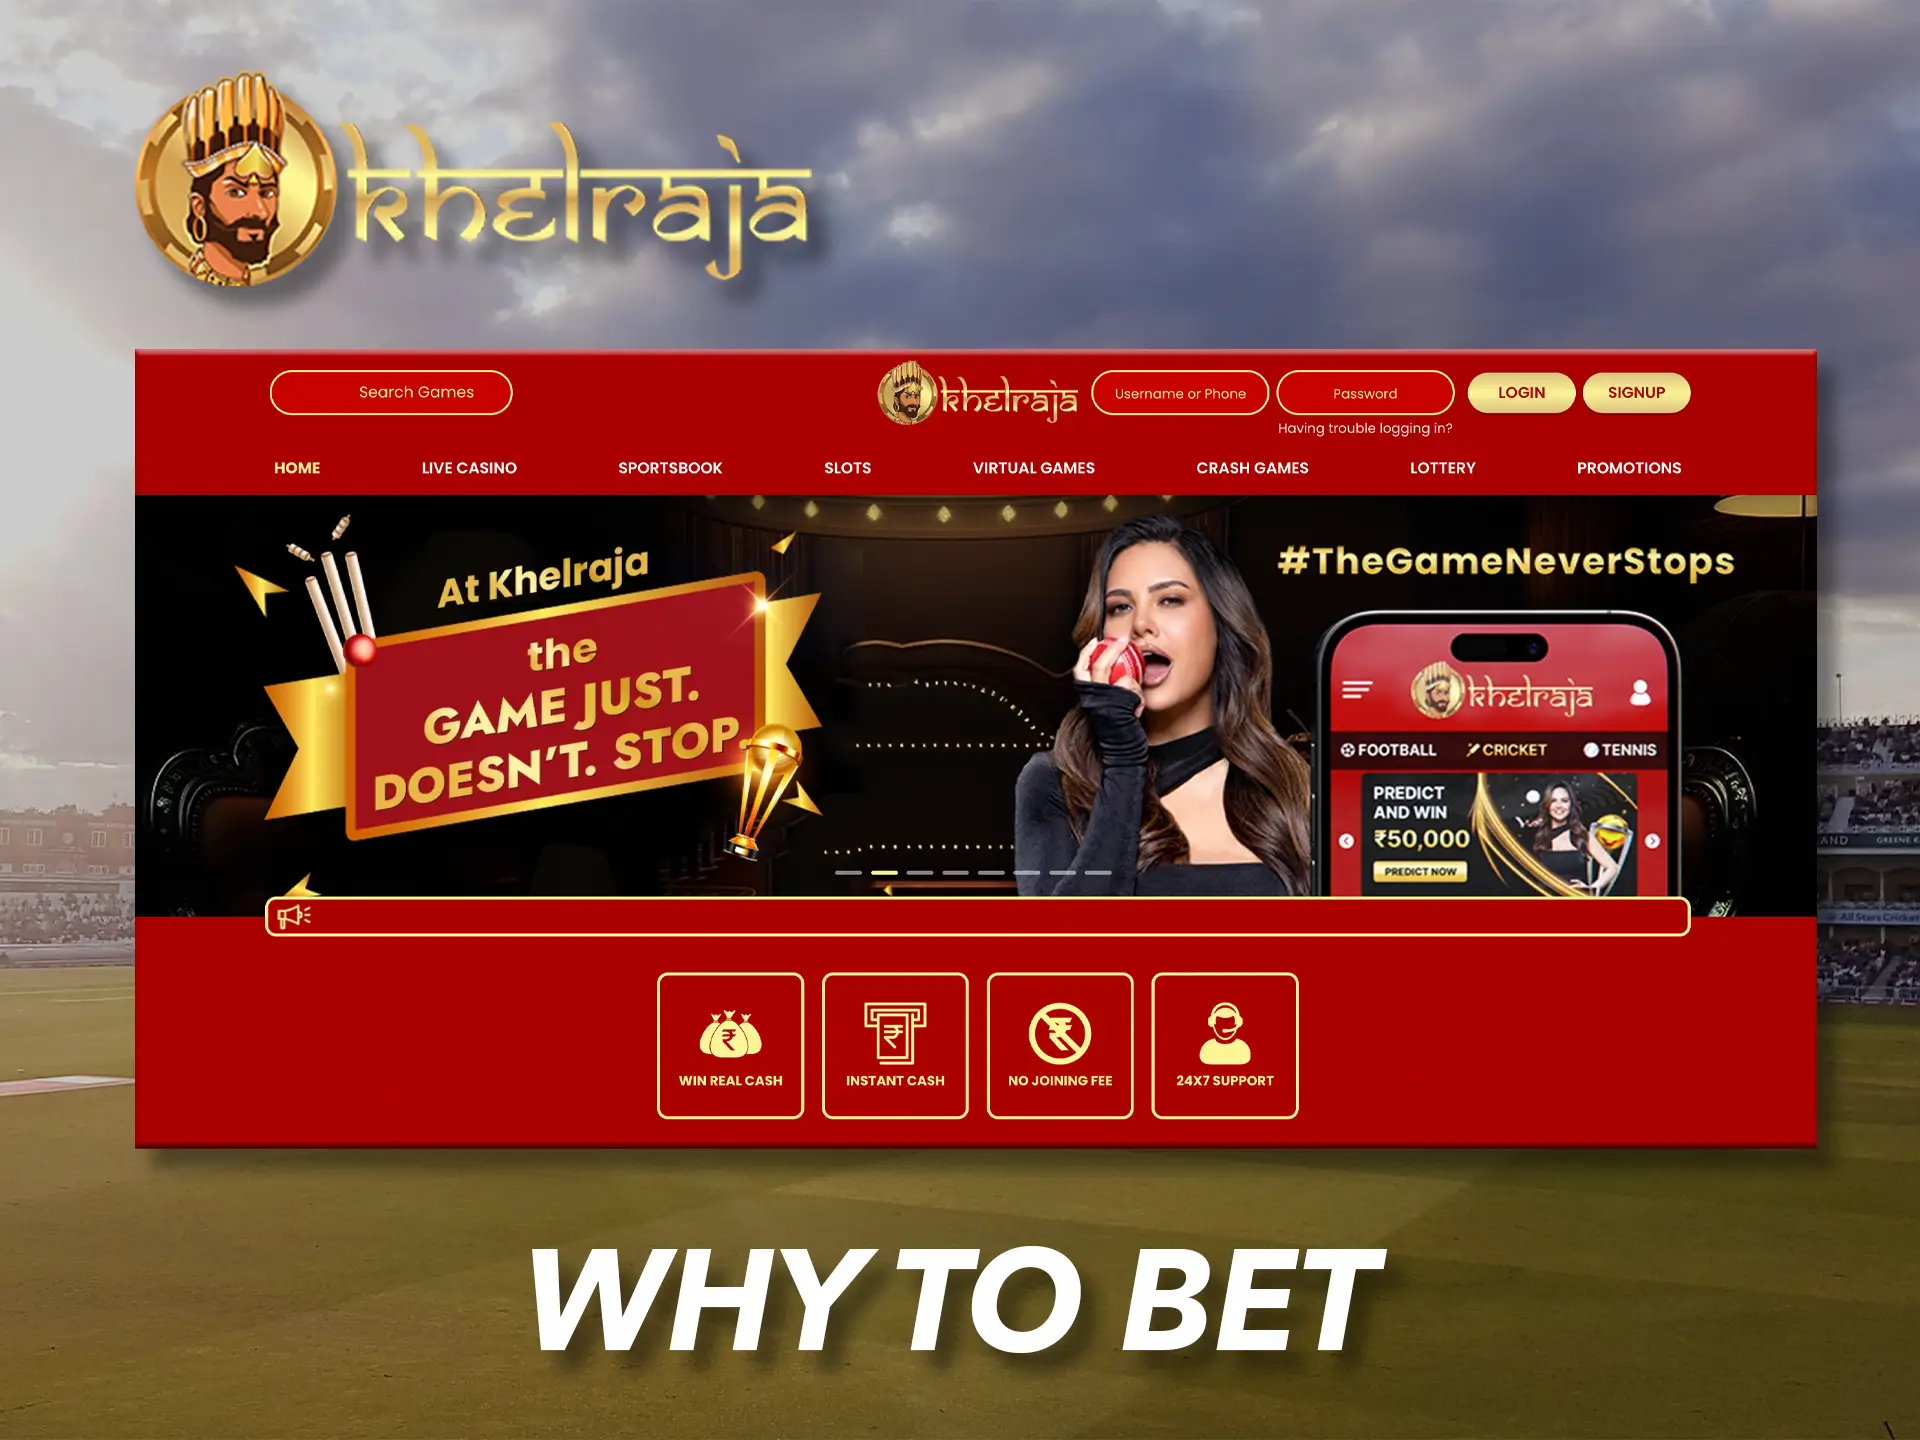 Make your predictions at the best Khelraja casino in India.